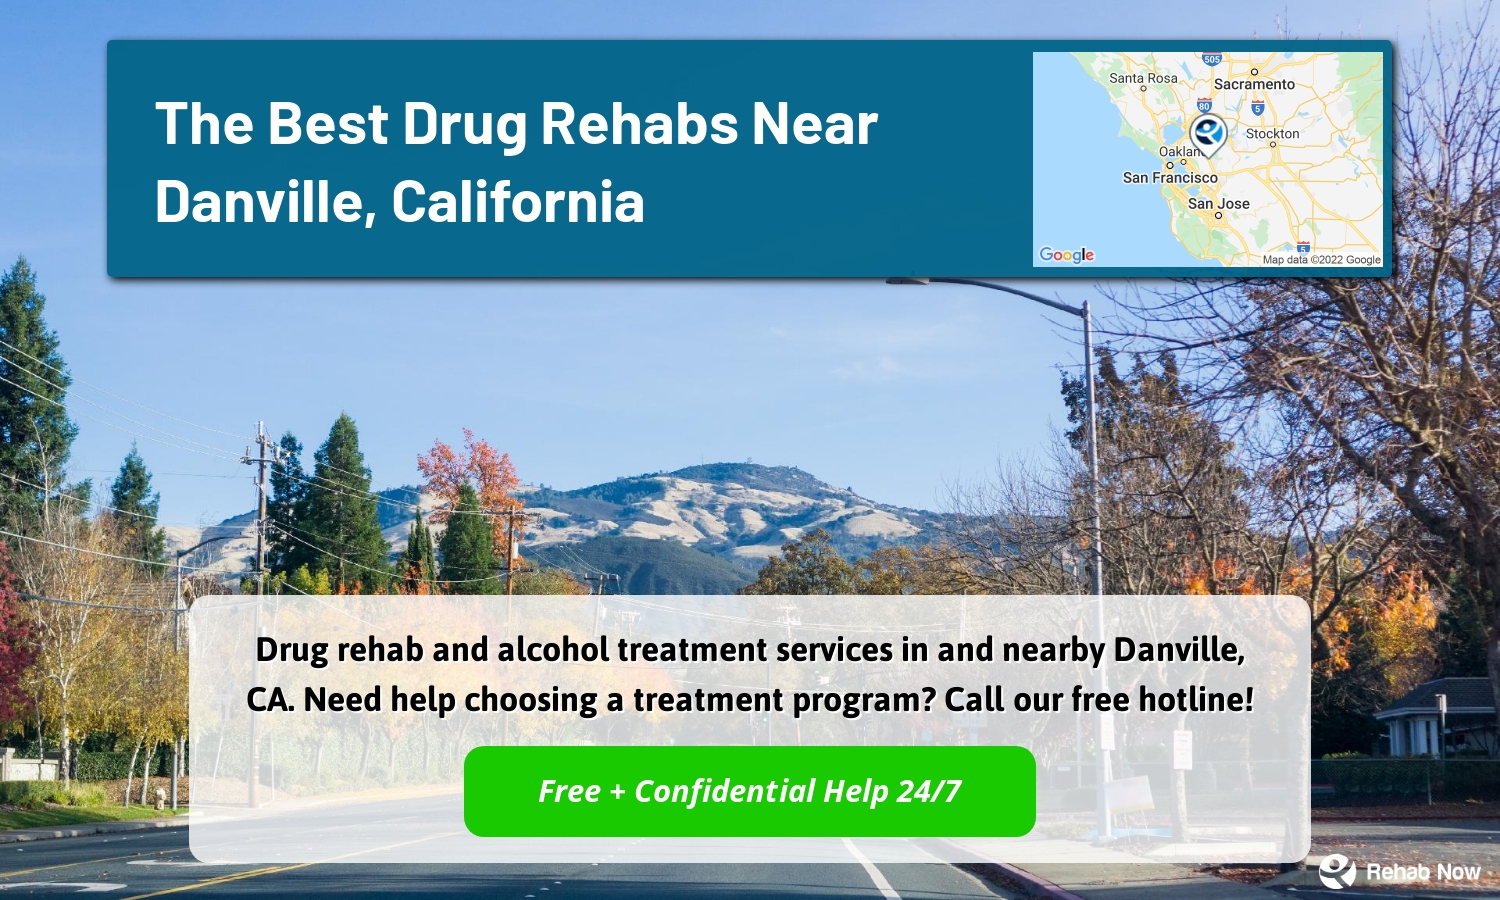 Drug rehab and alcohol treatment services in and nearby Danville, CA. Need help choosing a treatment program? Call our free hotline!